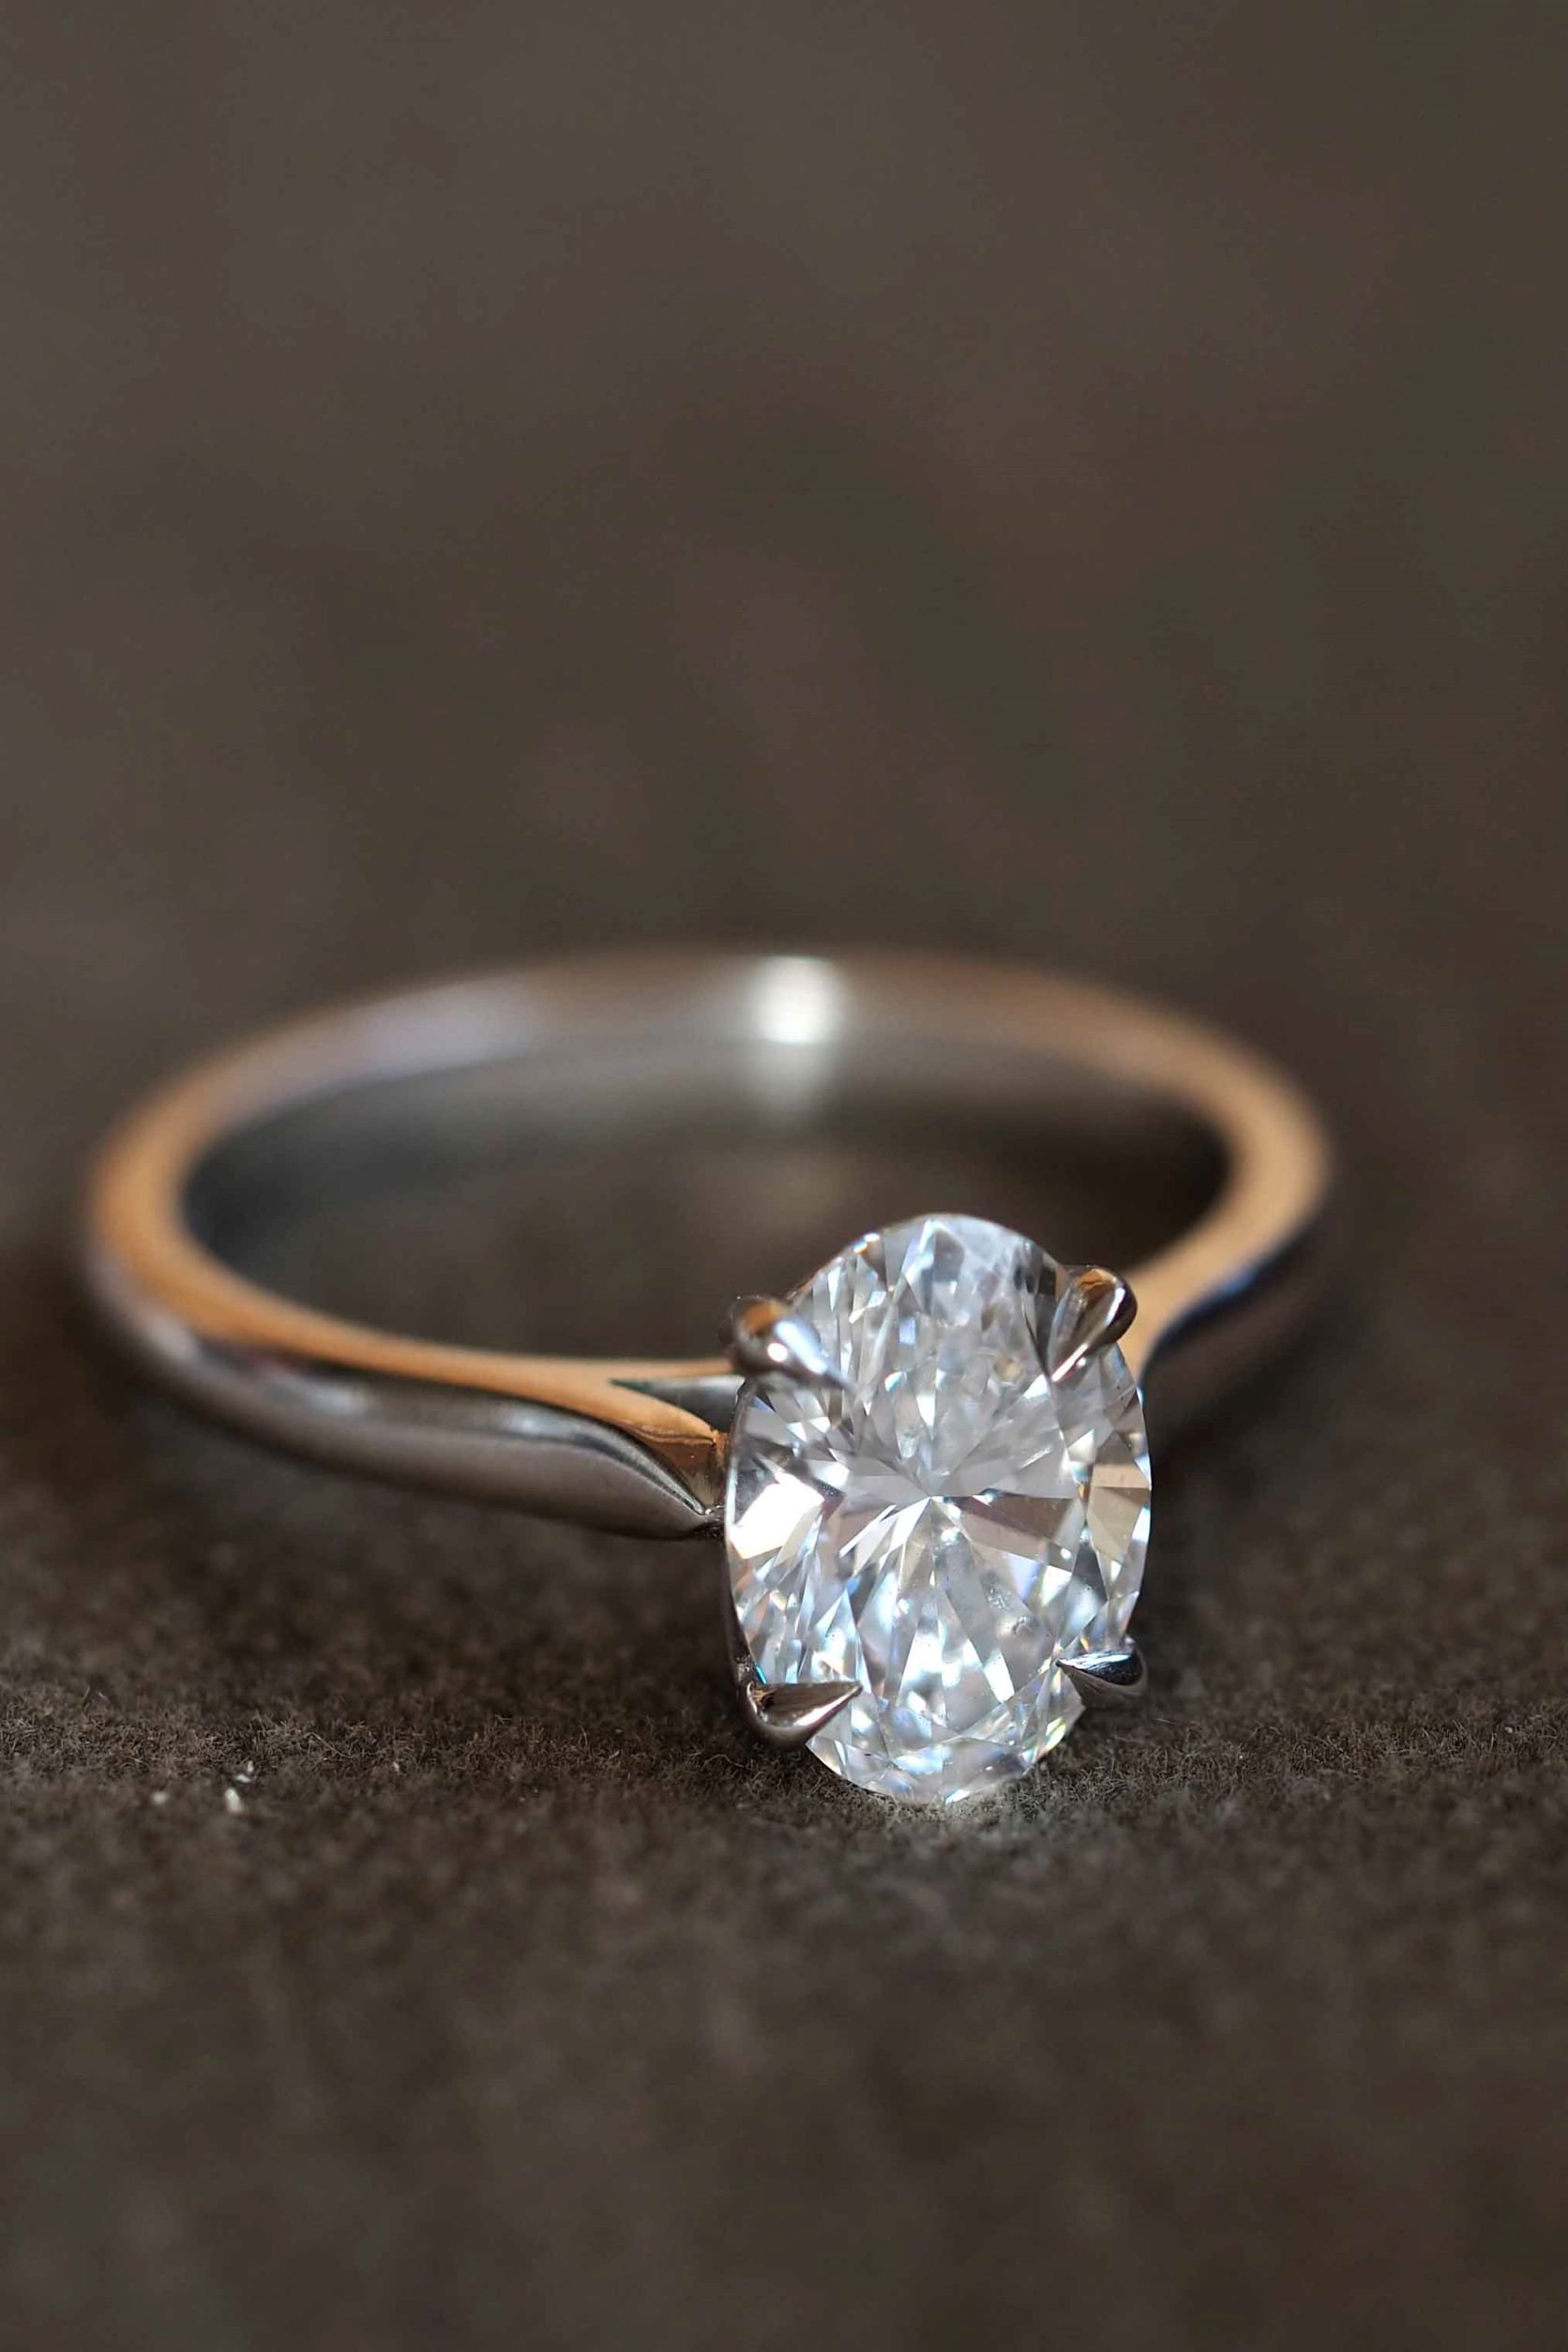 Resizing An Engagement Ring - Costs, Fit & Specifics – Ben Garelick